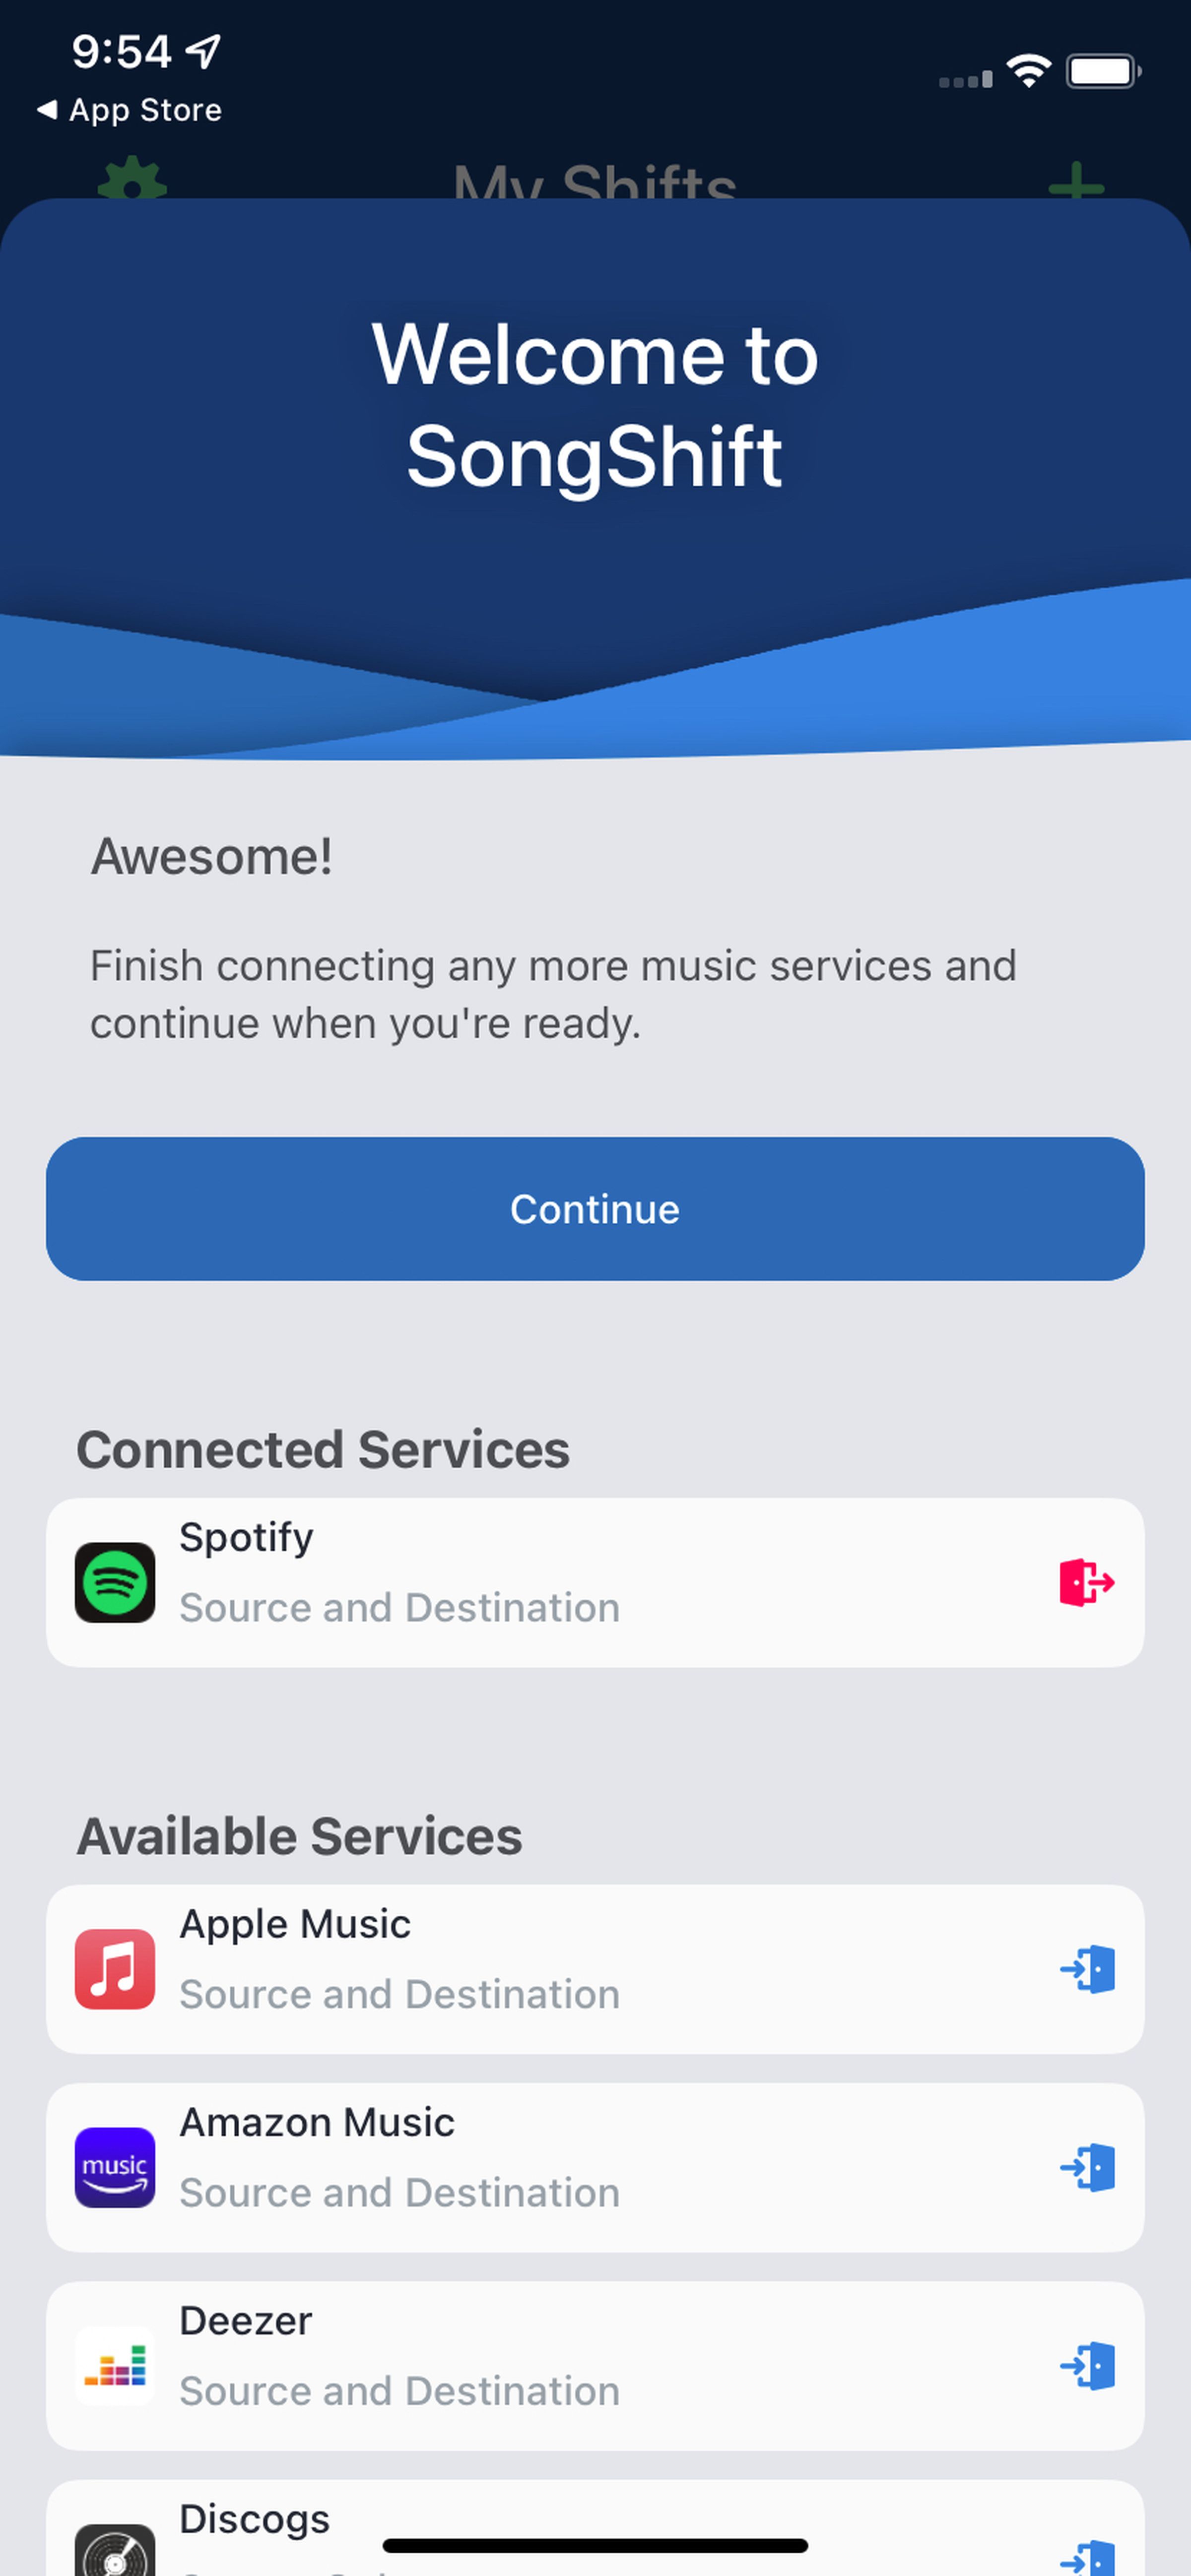 SongShift can connect 12 music services via its iOS app.